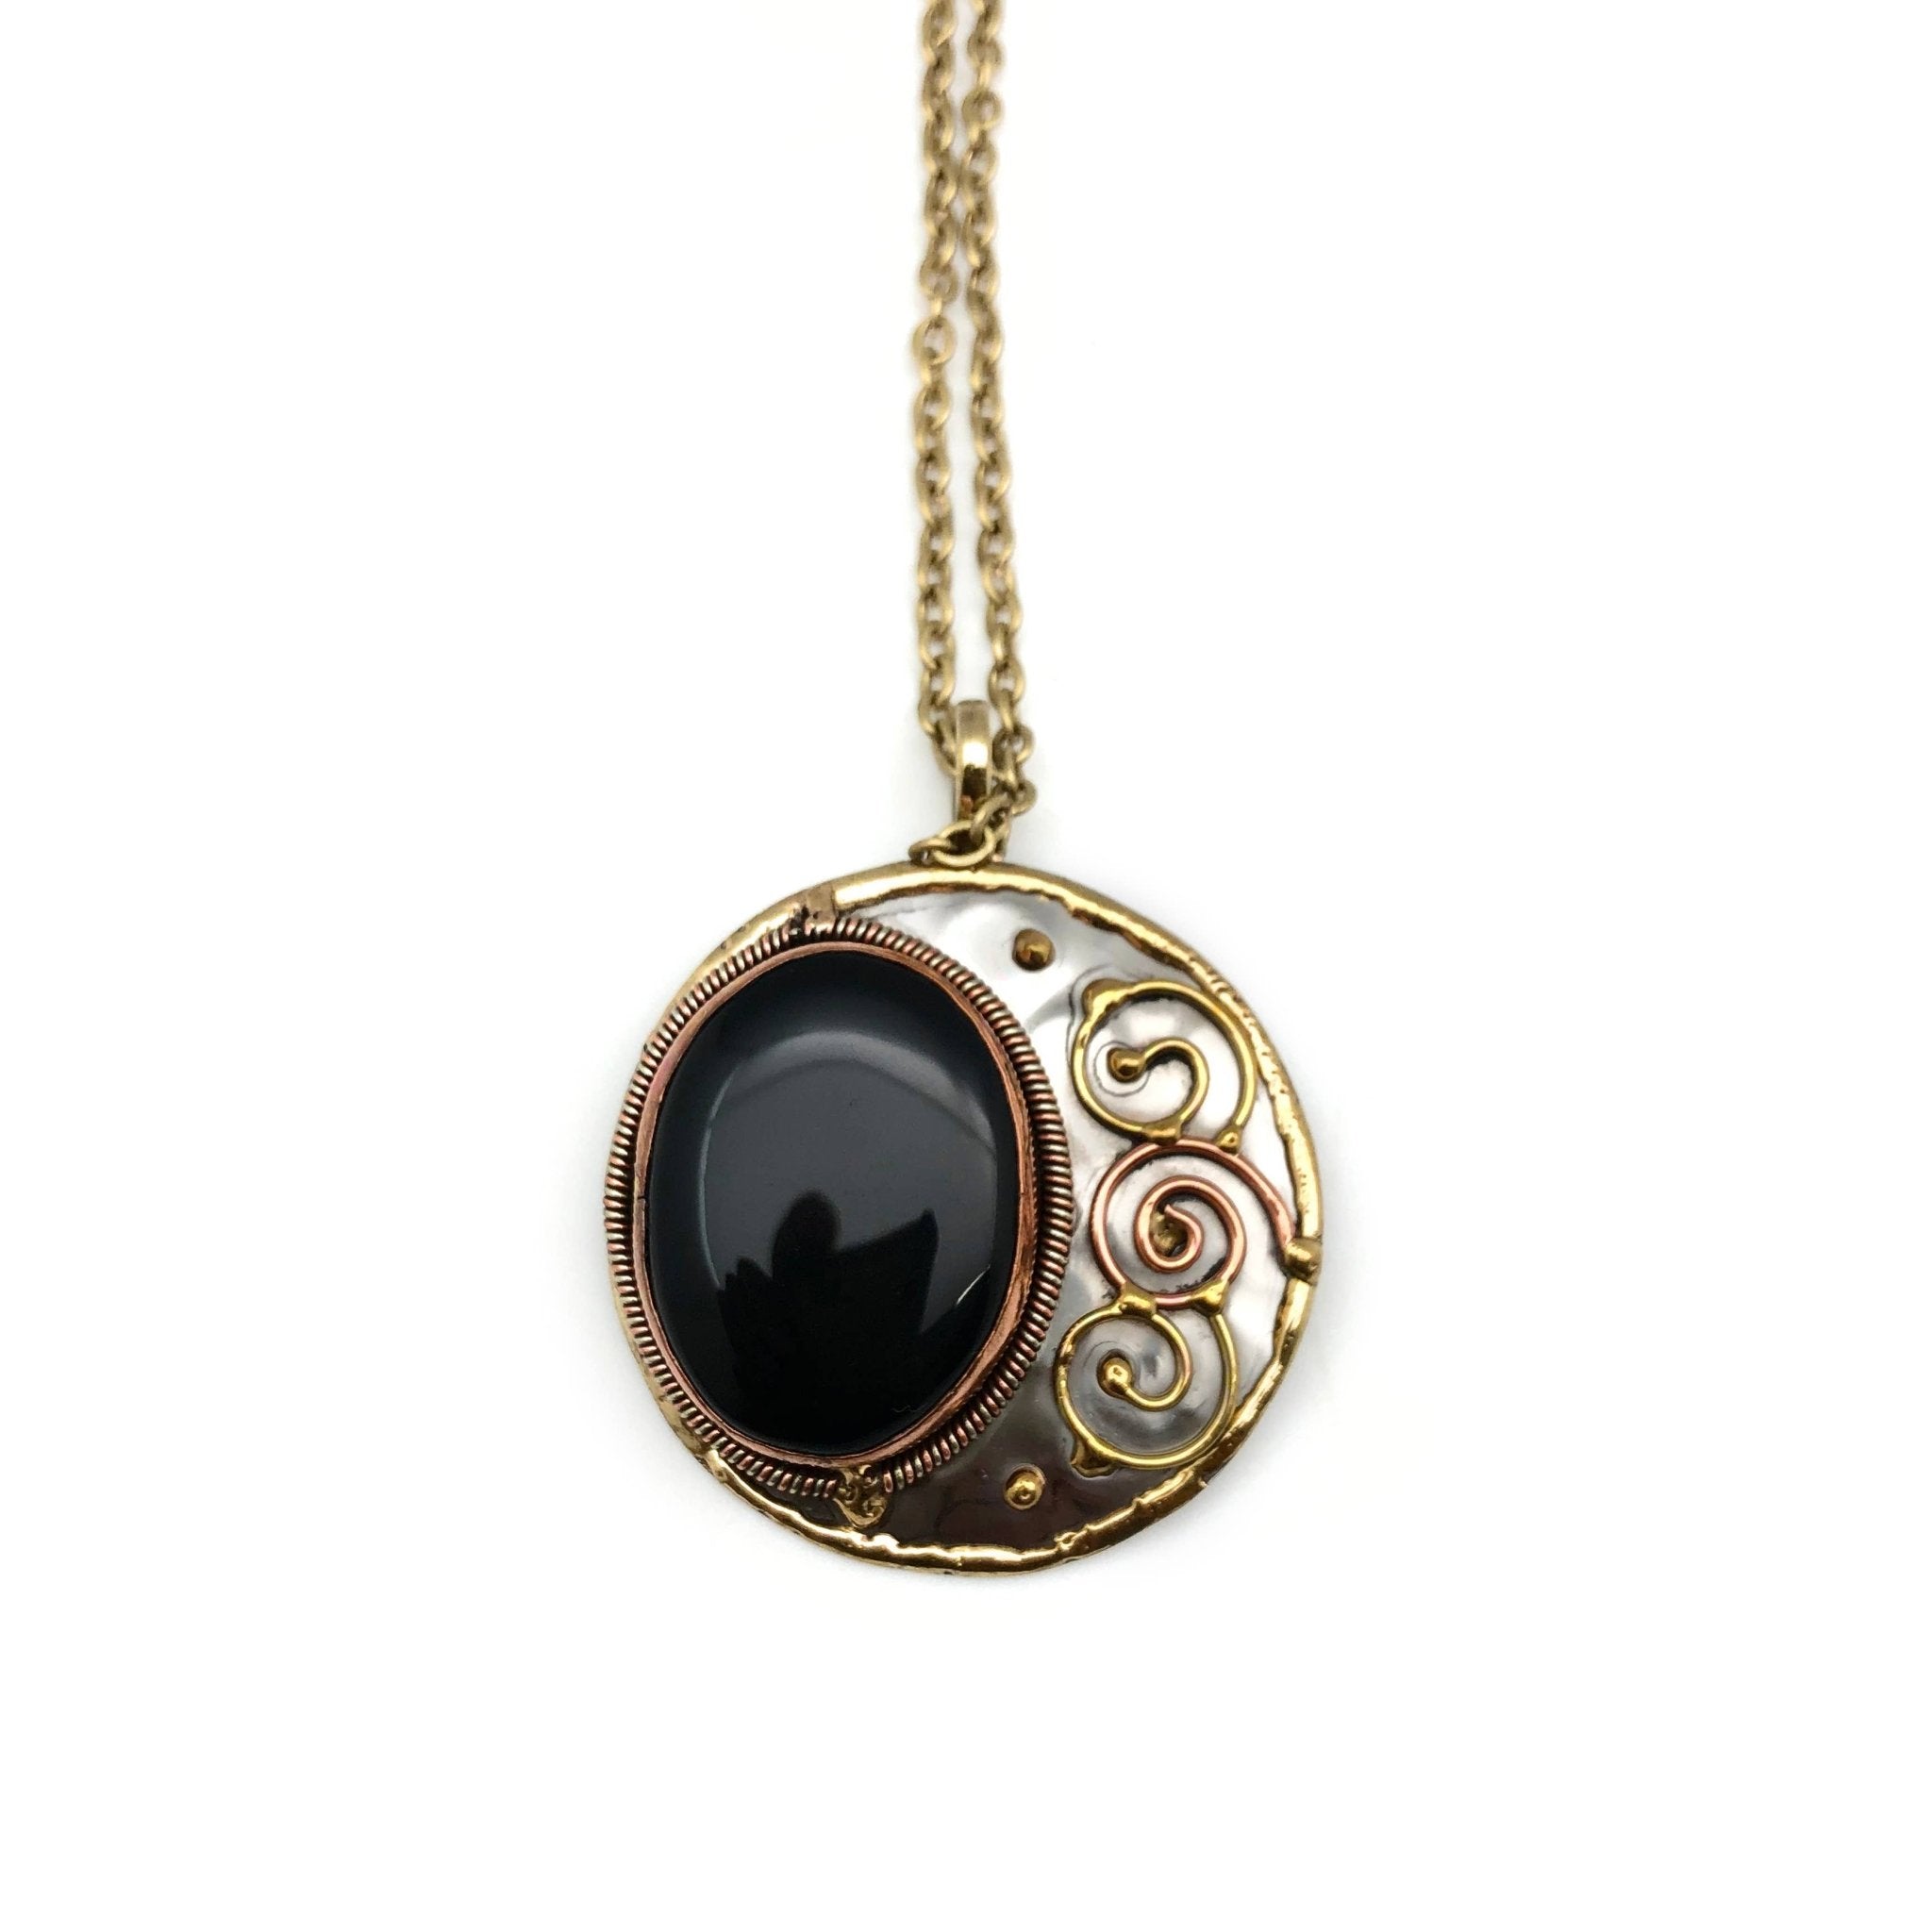 Mixed Metal and Black Onyx Stone Necklace - Spiral Circle